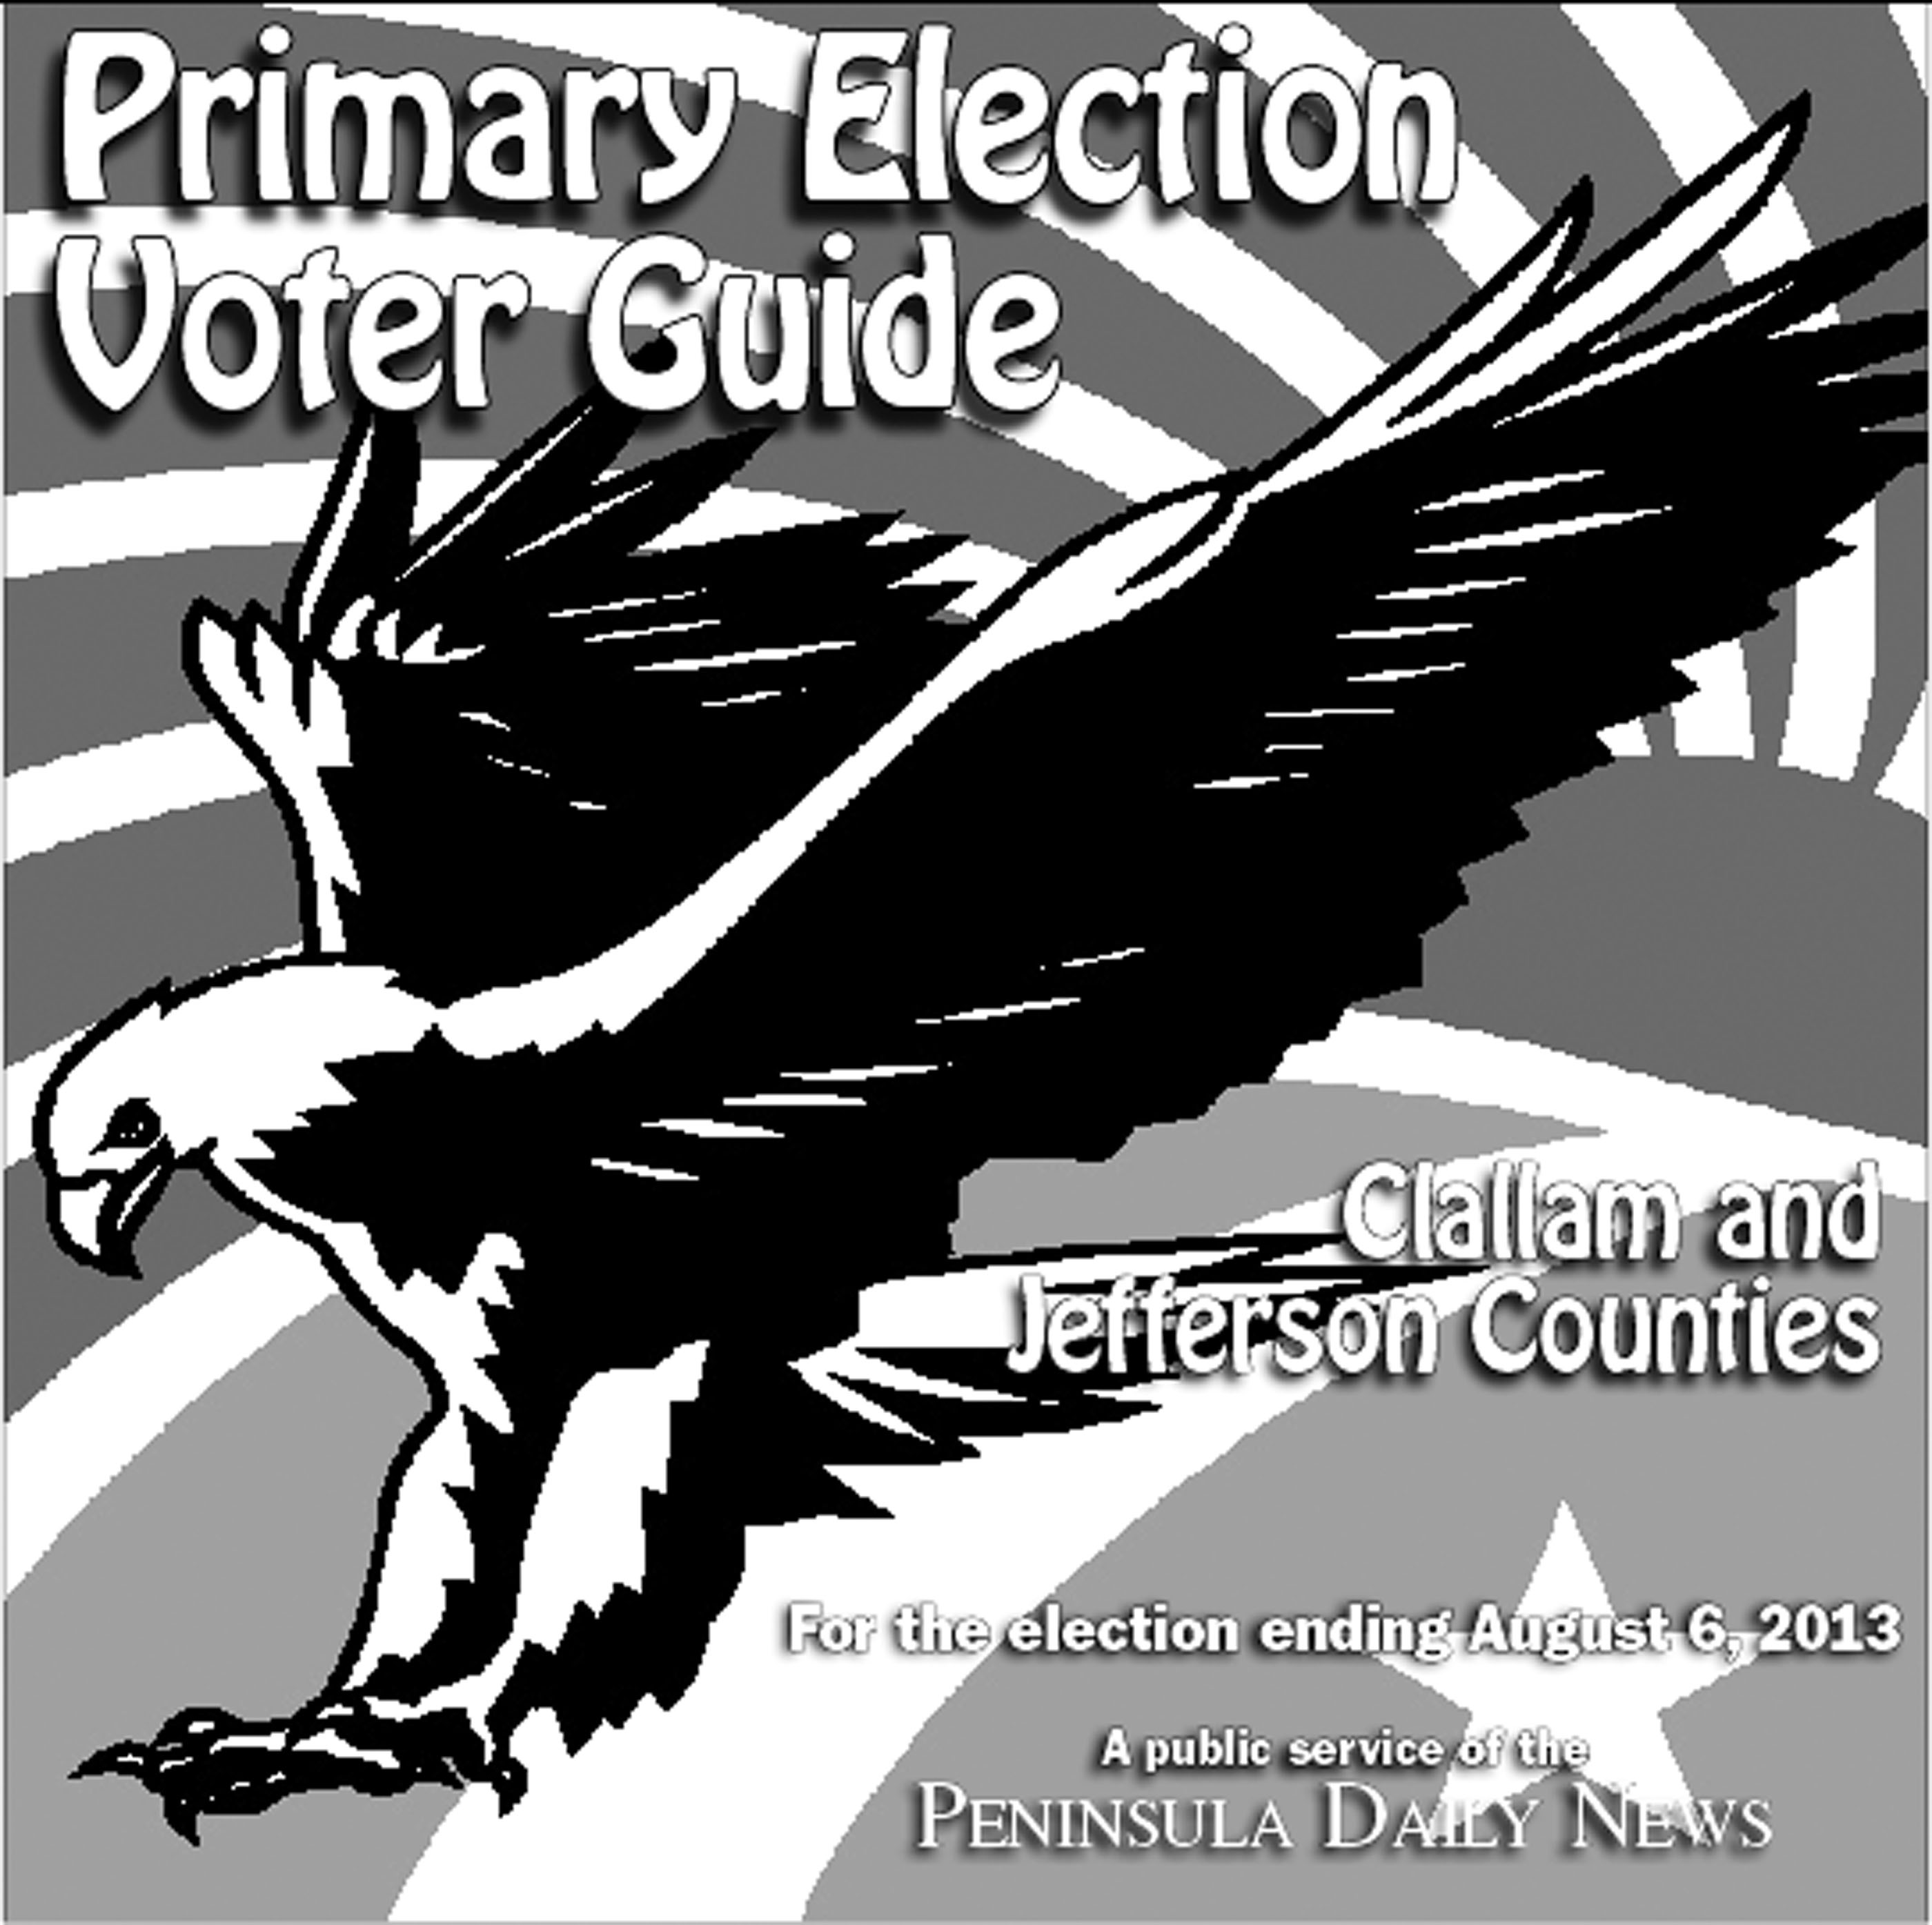 North Olympic Peninsula Primary Election Voter Guide still available